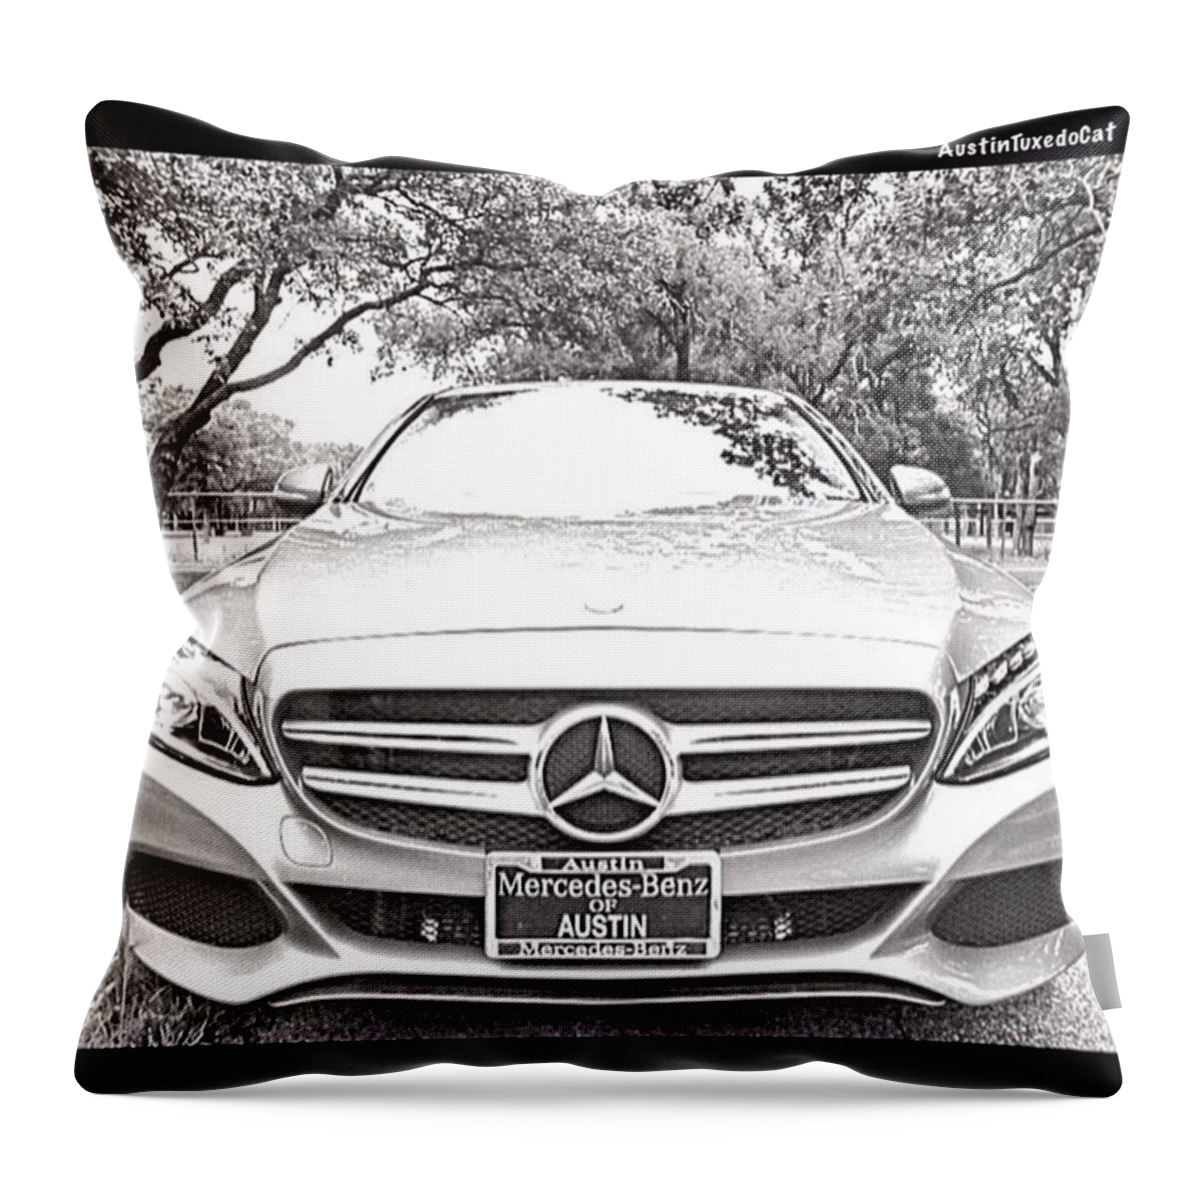 Beautiful Throw Pillow featuring the photograph #beautiful Even In A #blackandwhite by Austin Tuxedo Cat